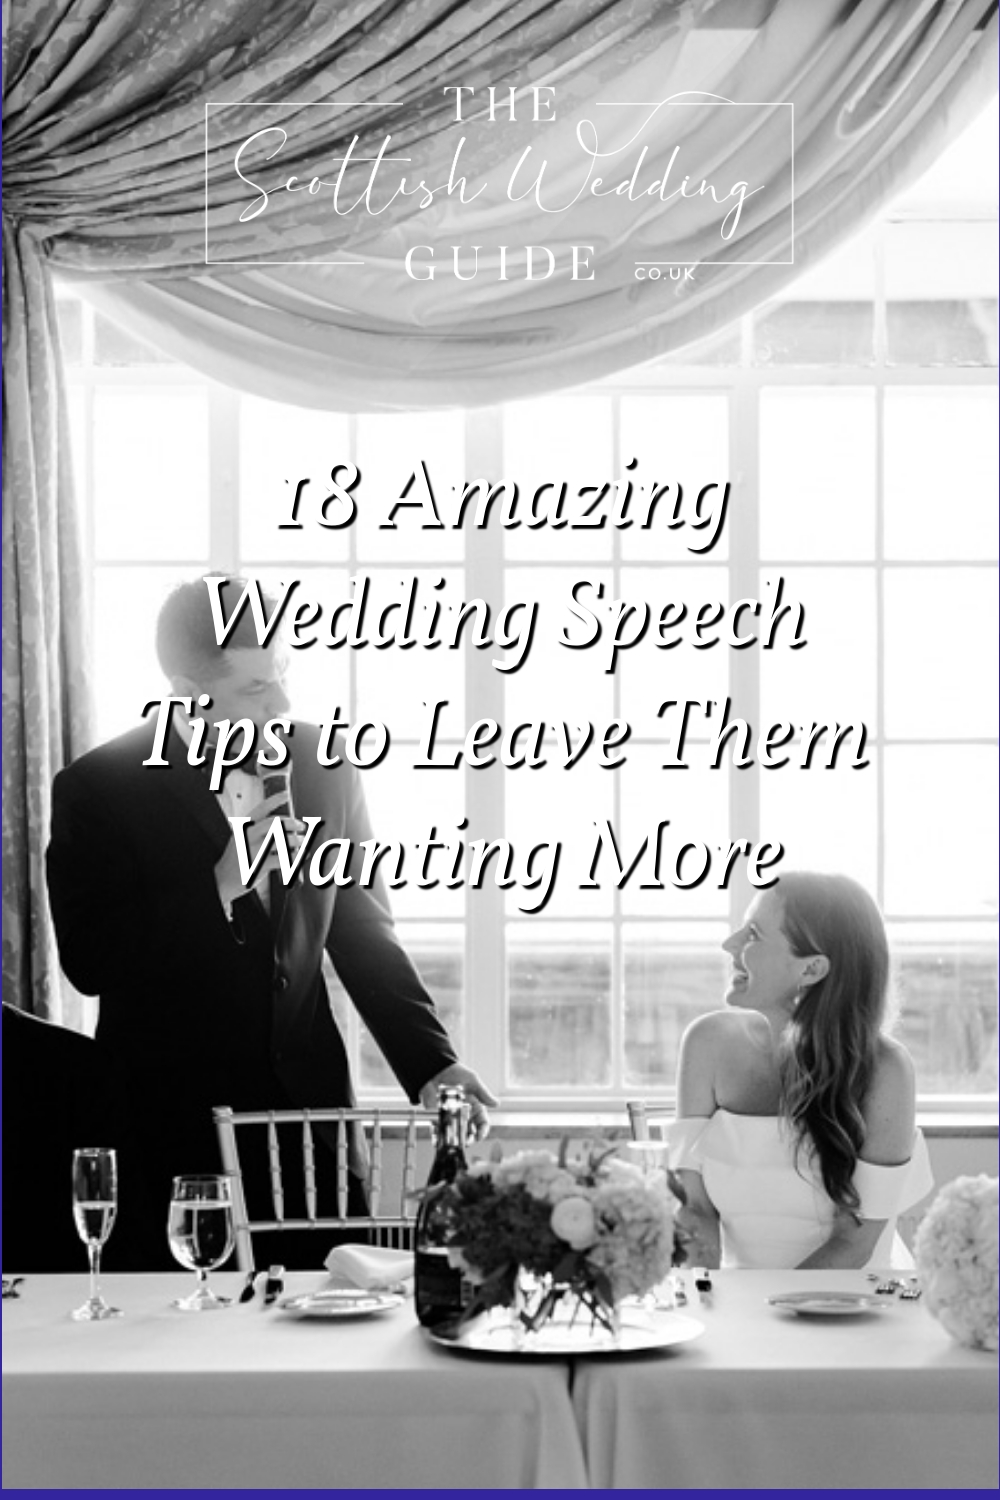 18 Amazing Wedding Speech Tips to Leave Them Wanting More